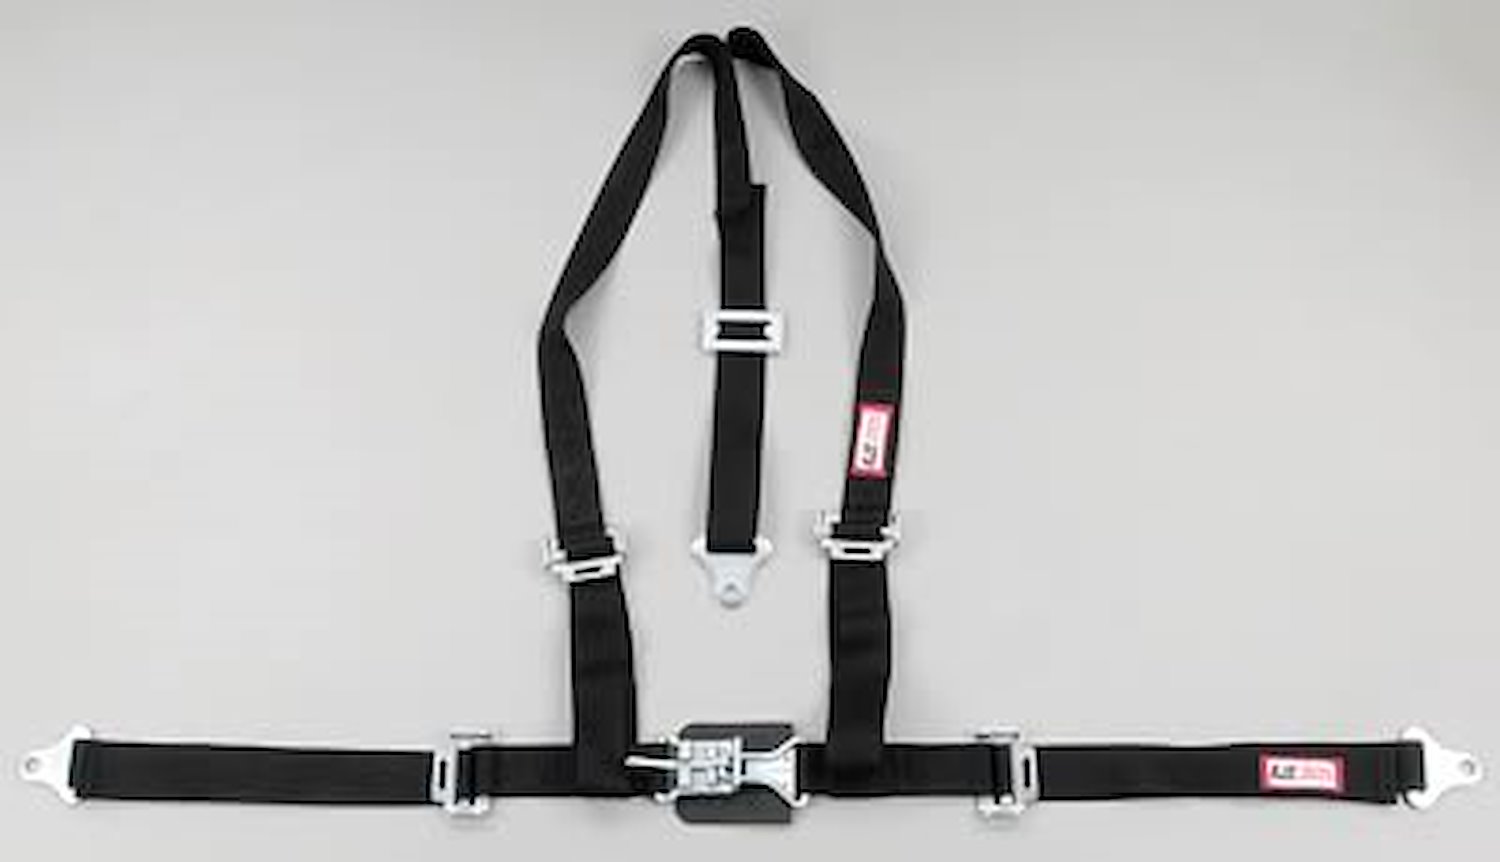 NON-SFI L&L HARNESS 2 PULL DOWN Lap Belt SNAP SEWN IN 2 S.H. Individual ROLL BAR Mount WRAP/BOLT RED